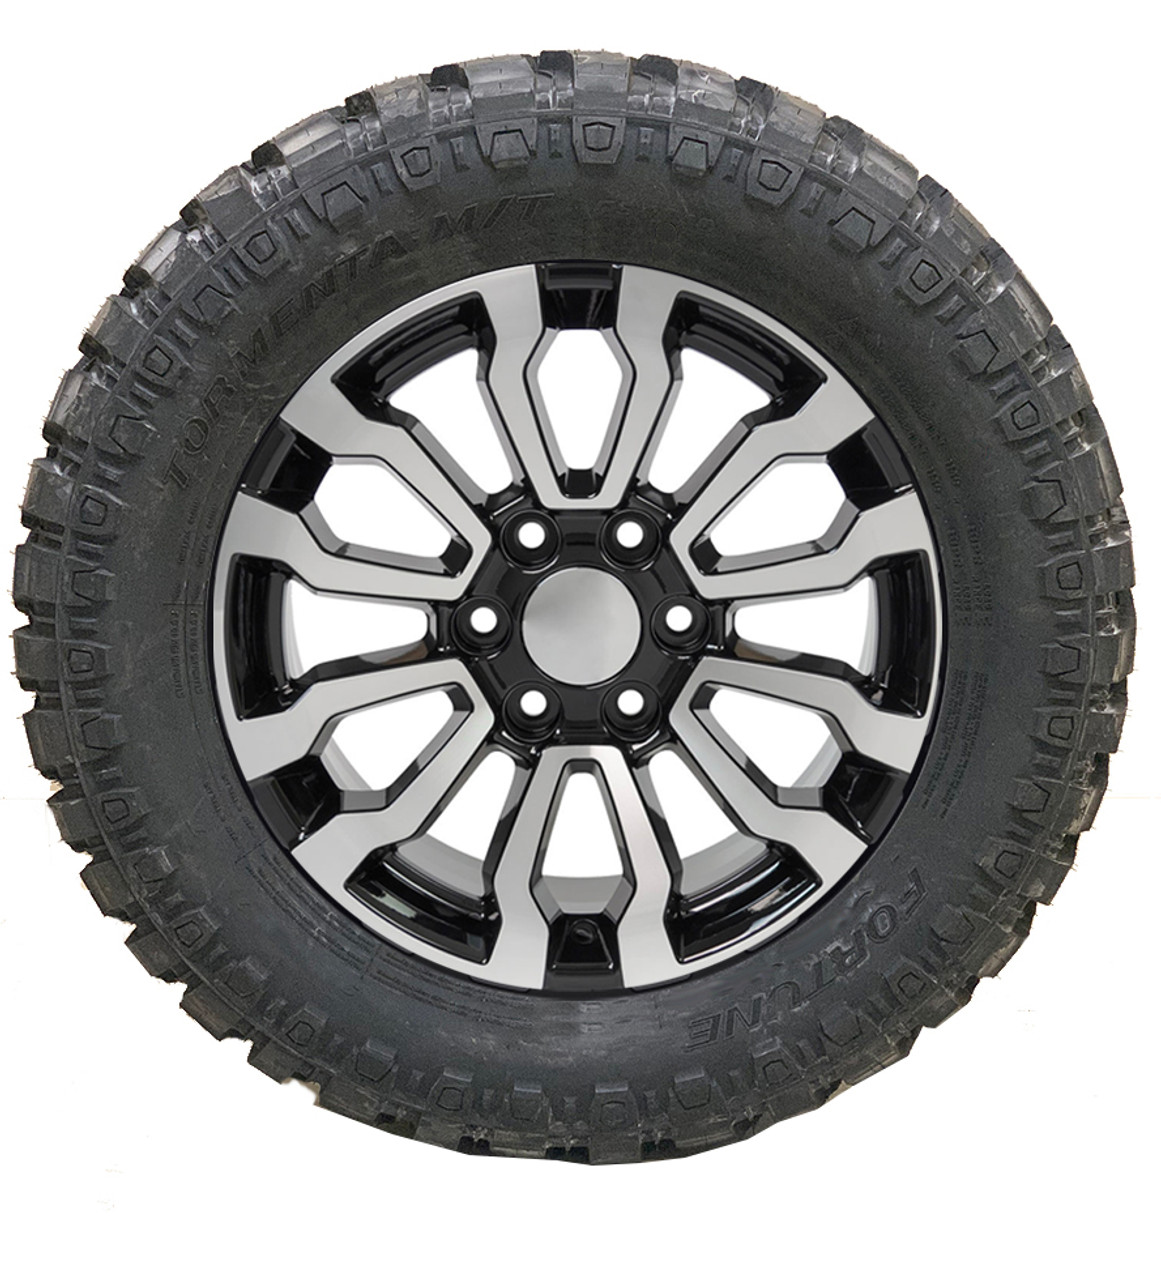 AT4 style Machine and Gloss Black 18 Wheels With Mud Terrain Tires